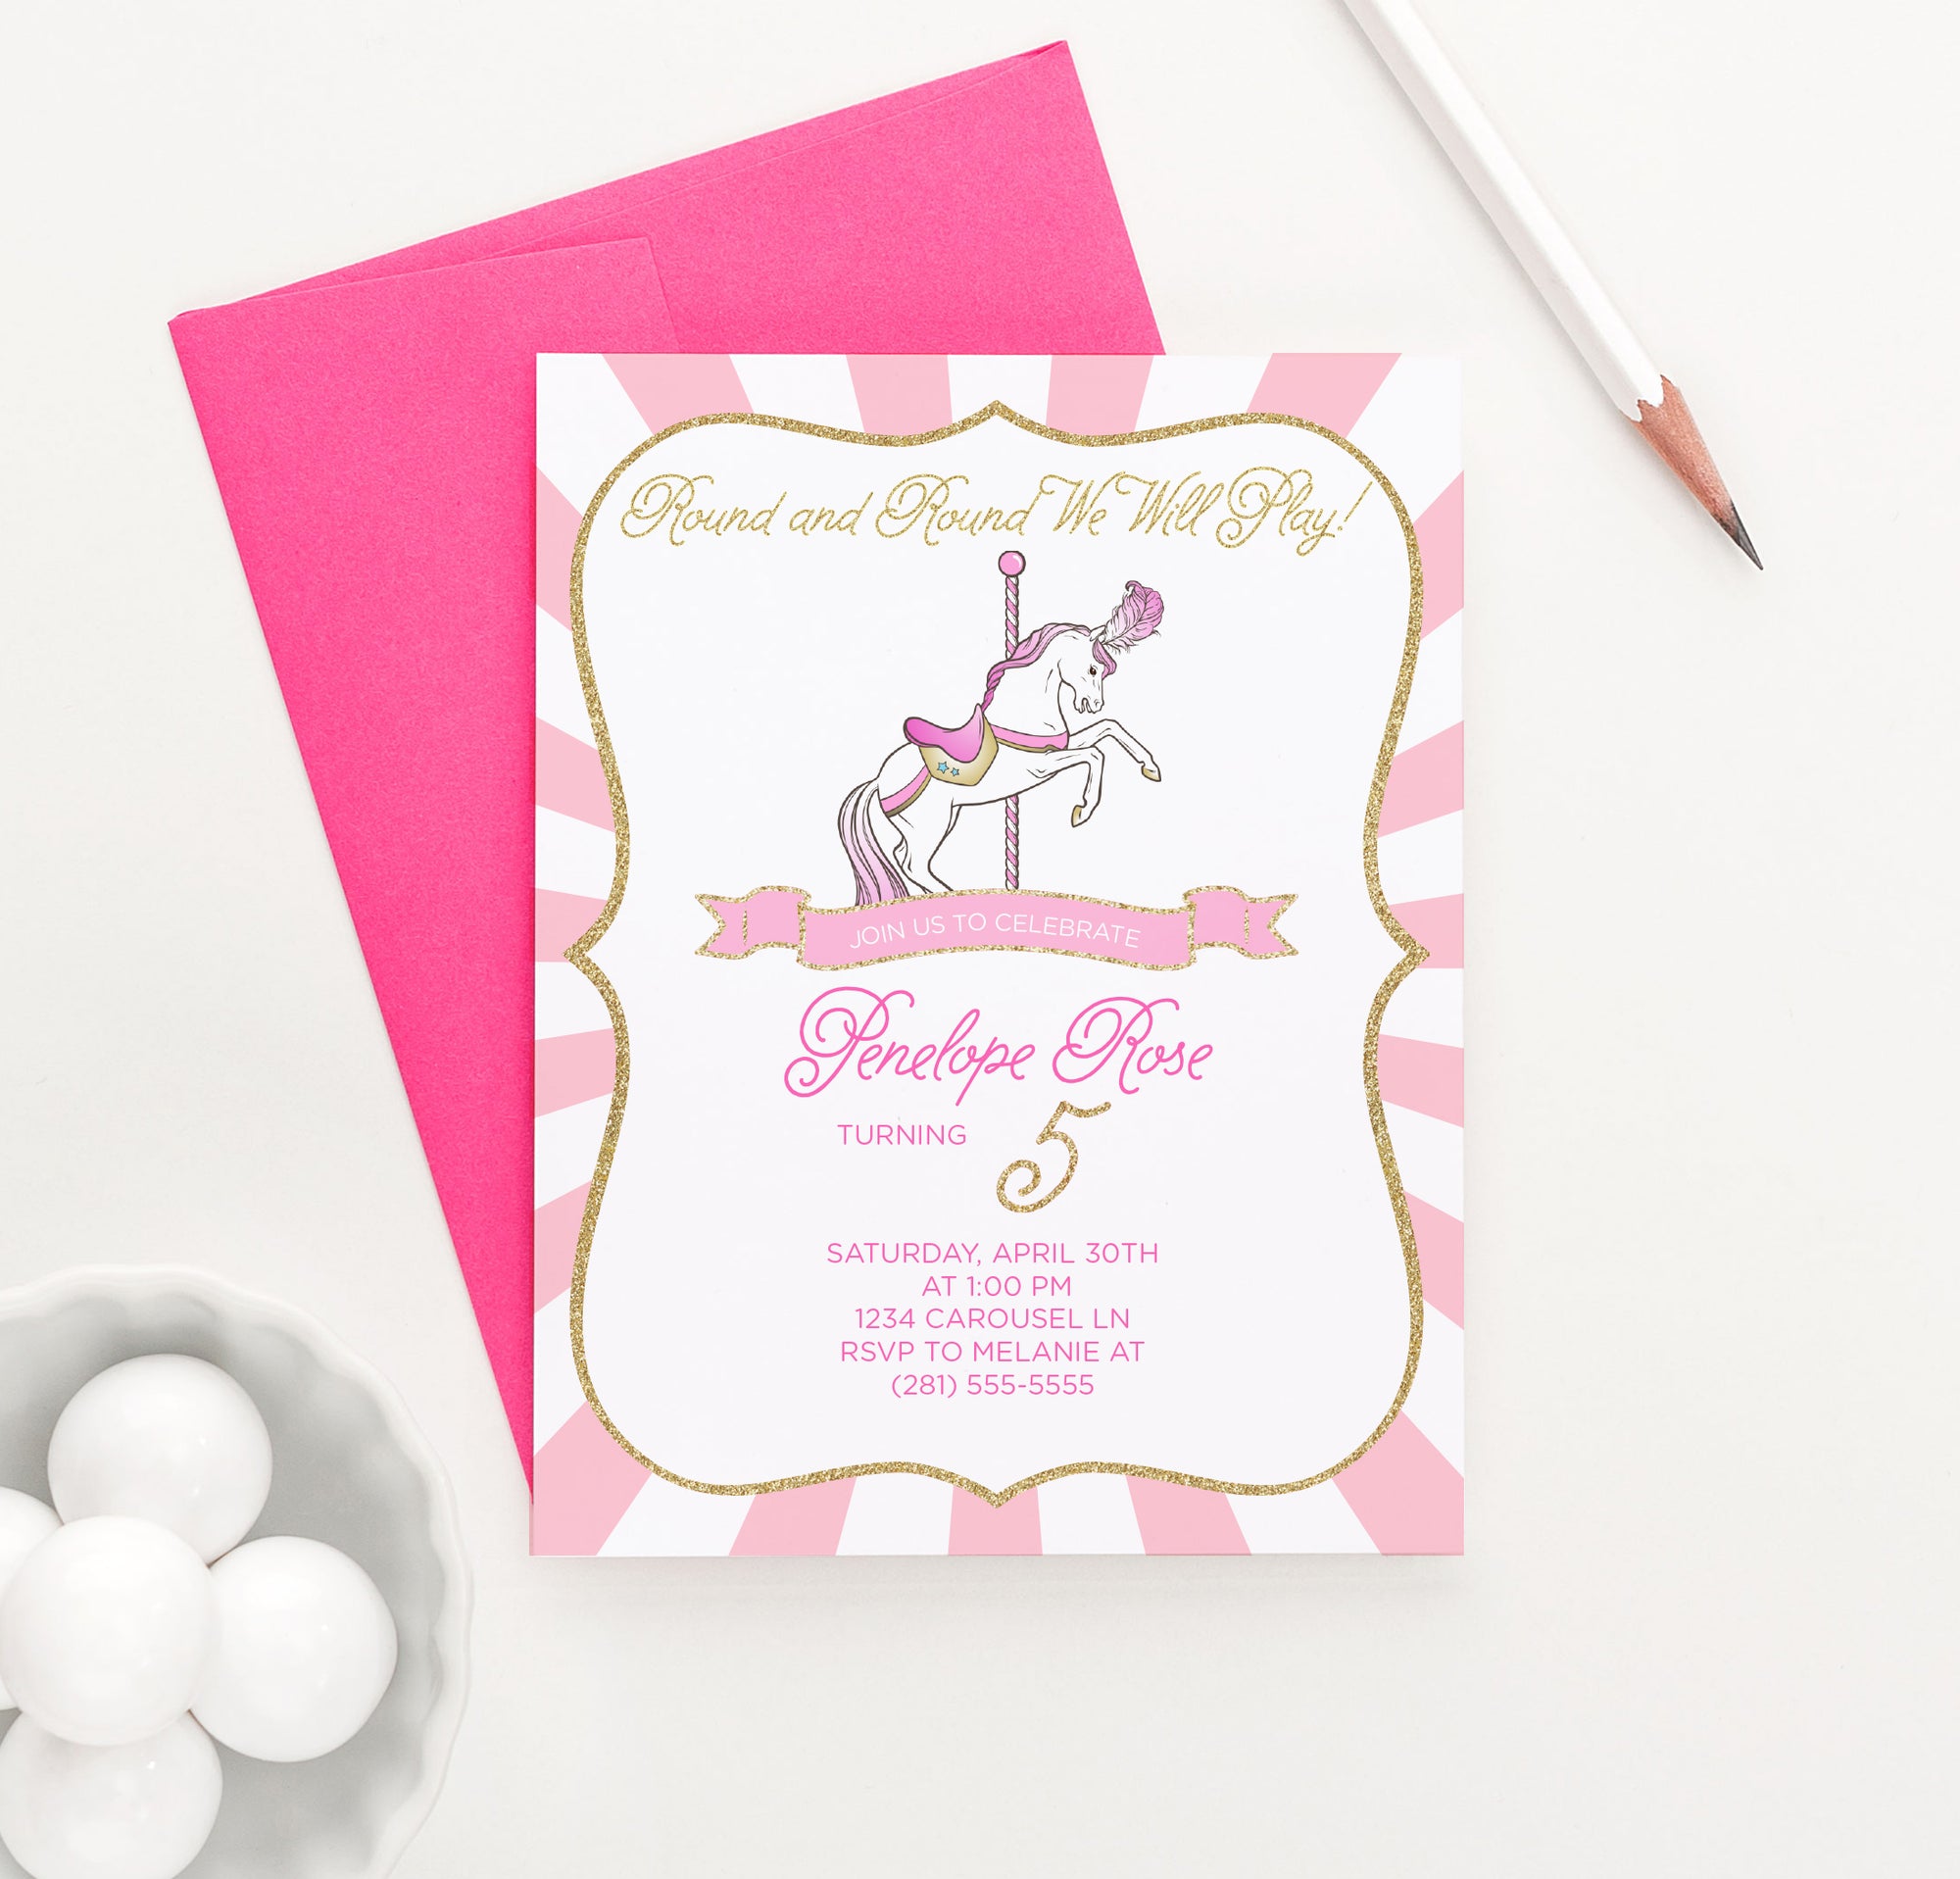 Pink And Gold Birthday Party Invitations With Carousel Horse 